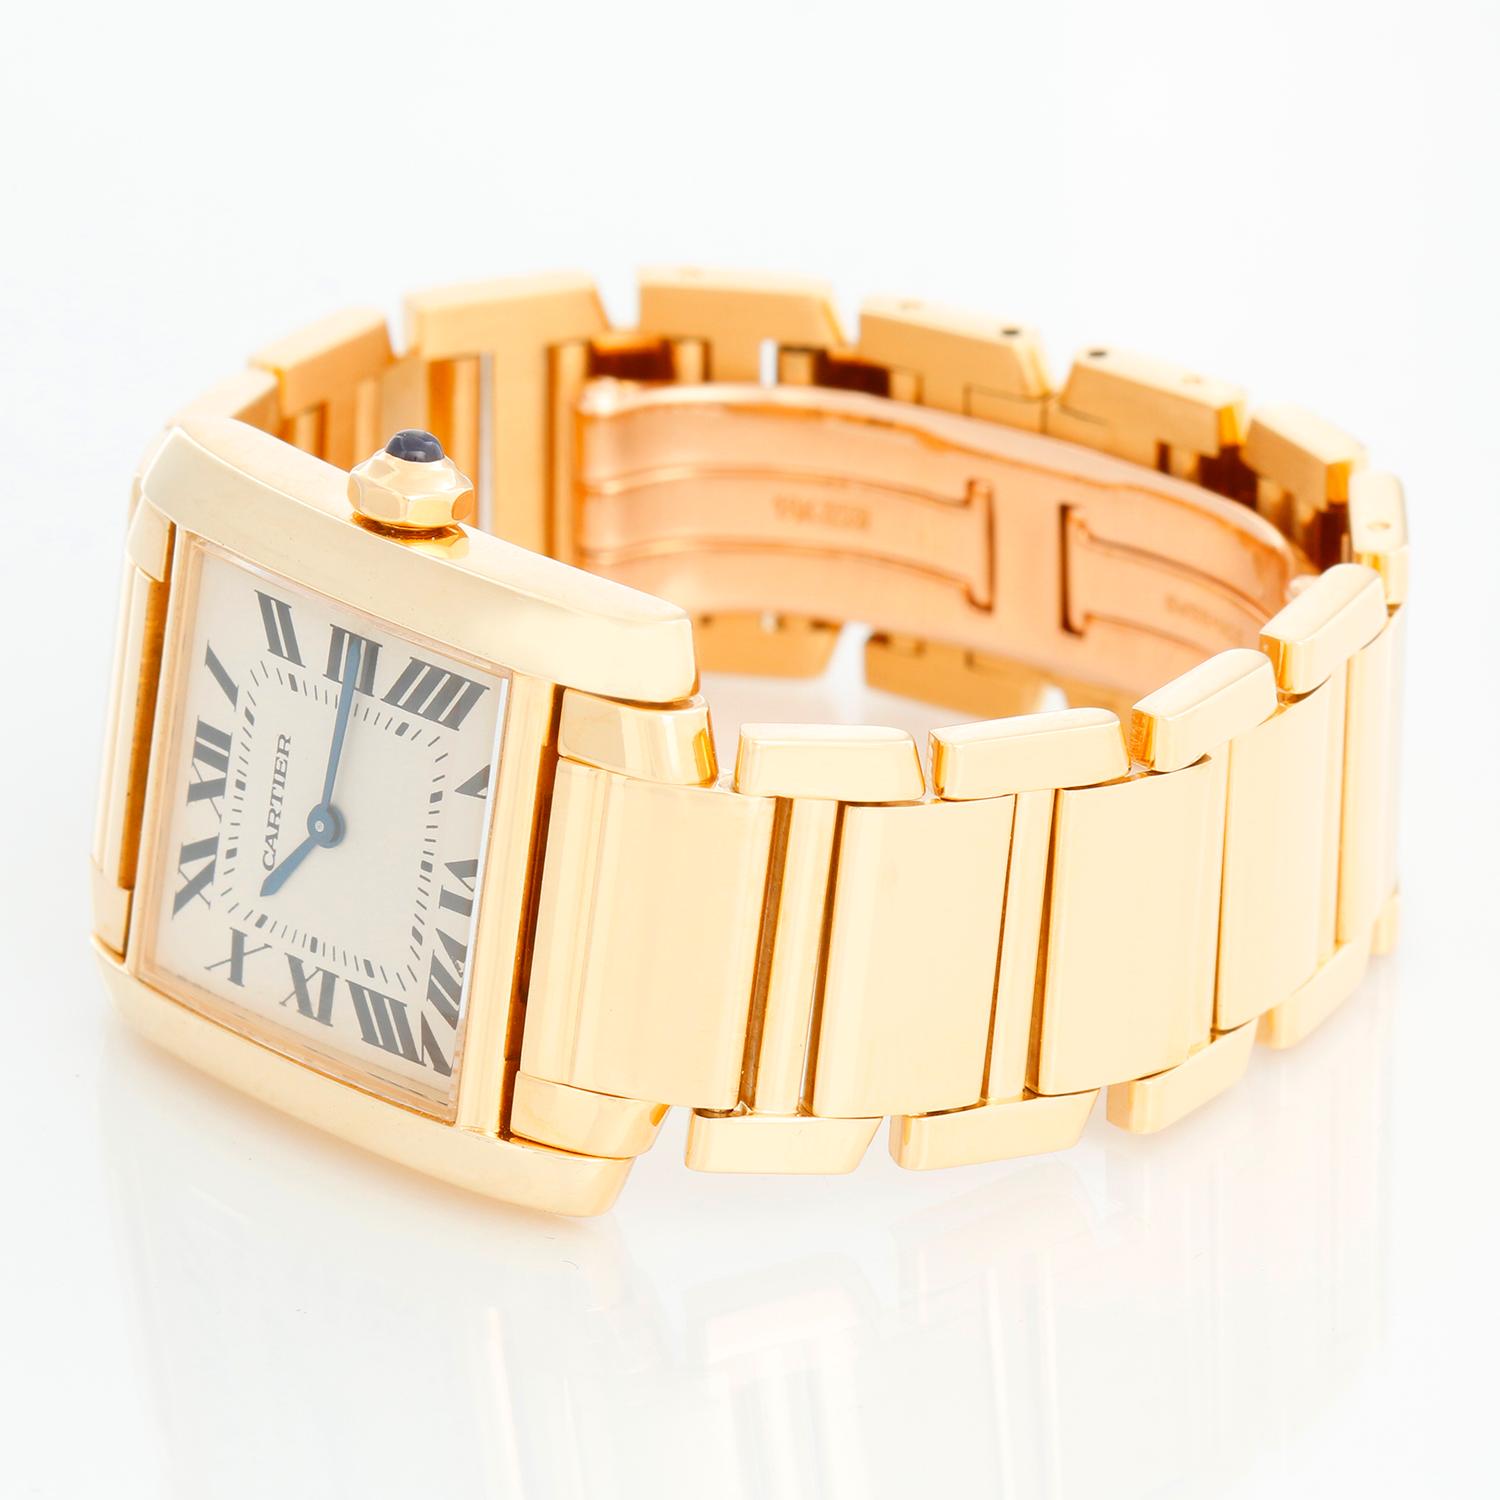 Cartier Tank Francaise Midsize 18k Yellow Gold Watch W50003N2 1821 - Quartz. 18k yellow gold  case; blue sapphire cabochon crown and diamond bezel  (25mm x 30mm). Ivory colored dial with black Roman numerals. 18K Yellow gold bracelet; will fit a 6